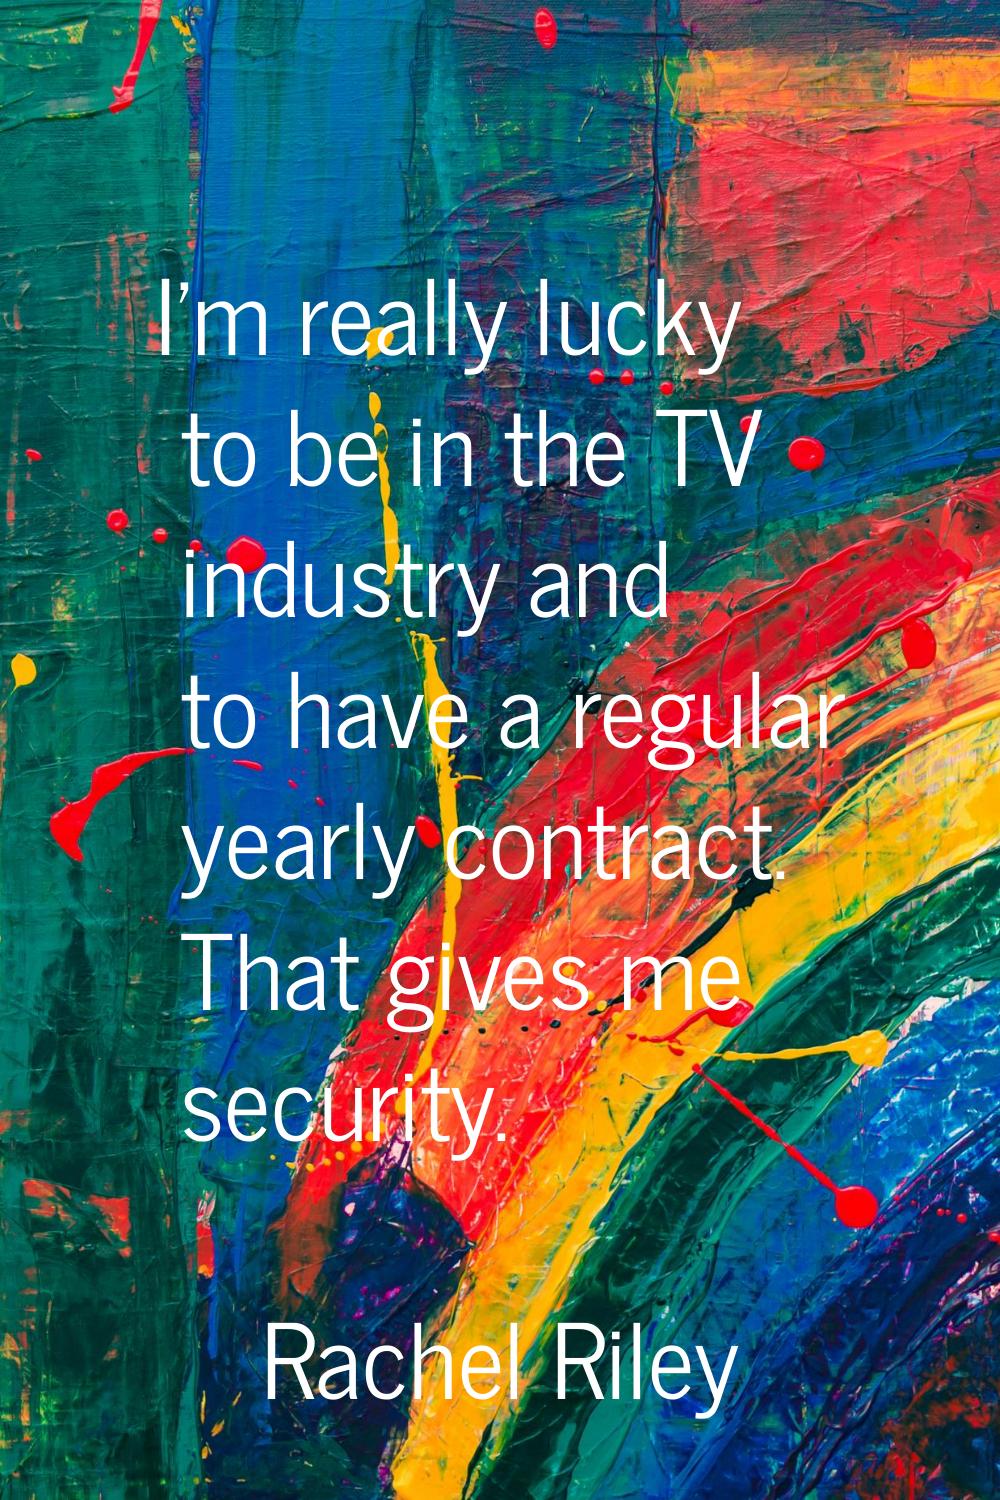 I'm really lucky to be in the TV industry and to have a regular yearly contract. That gives me secu